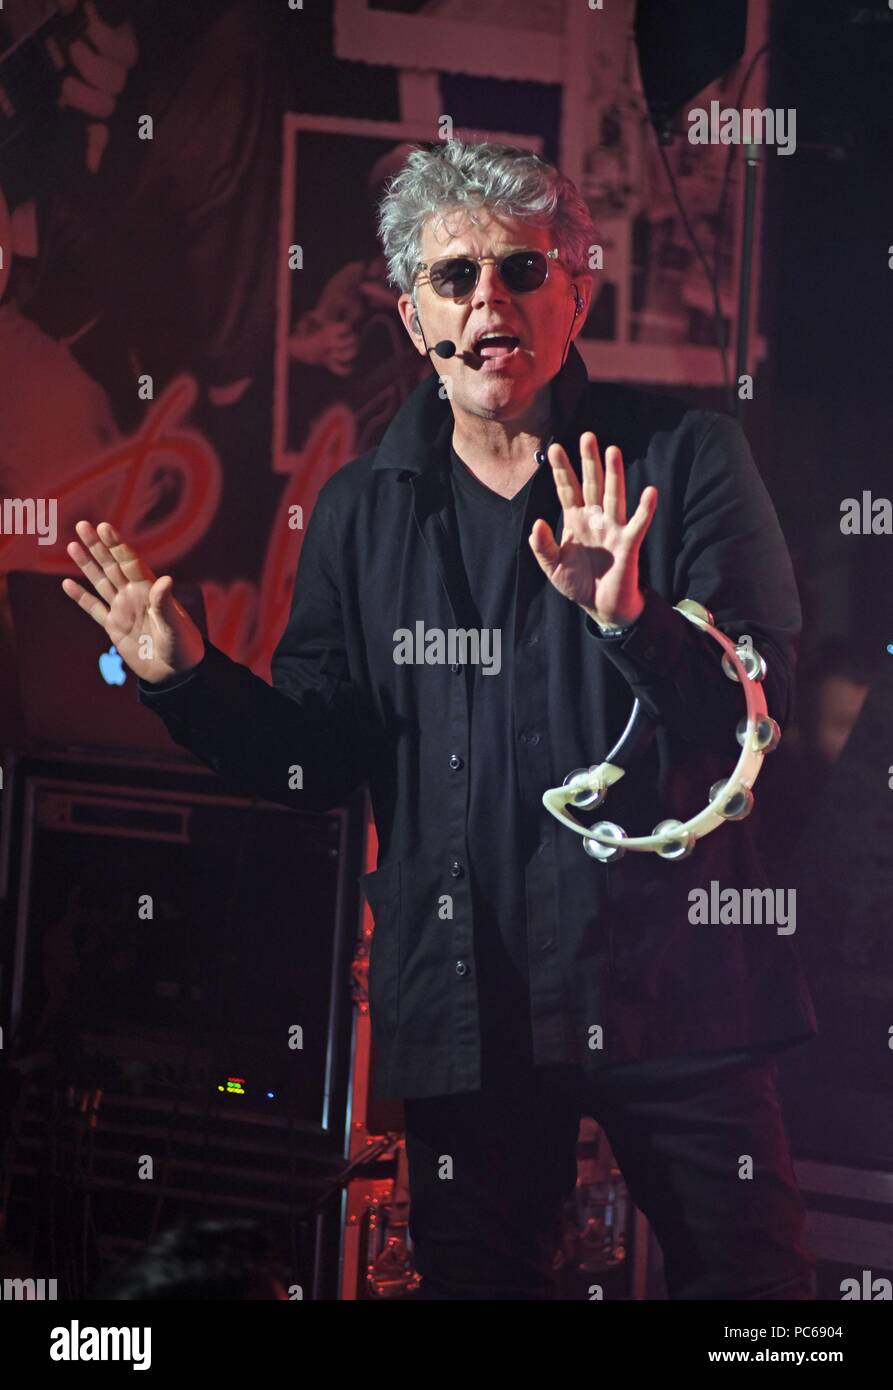 New York, NY, USA. 31st July, 2018. Tom Bailey in attendance for The Thompson Twins' Tom Bailey in Concert, Iridium, New York, NY July 31, 2018. Credit: Derek Storm/Everett Collection/Alamy Live News Stock Photo